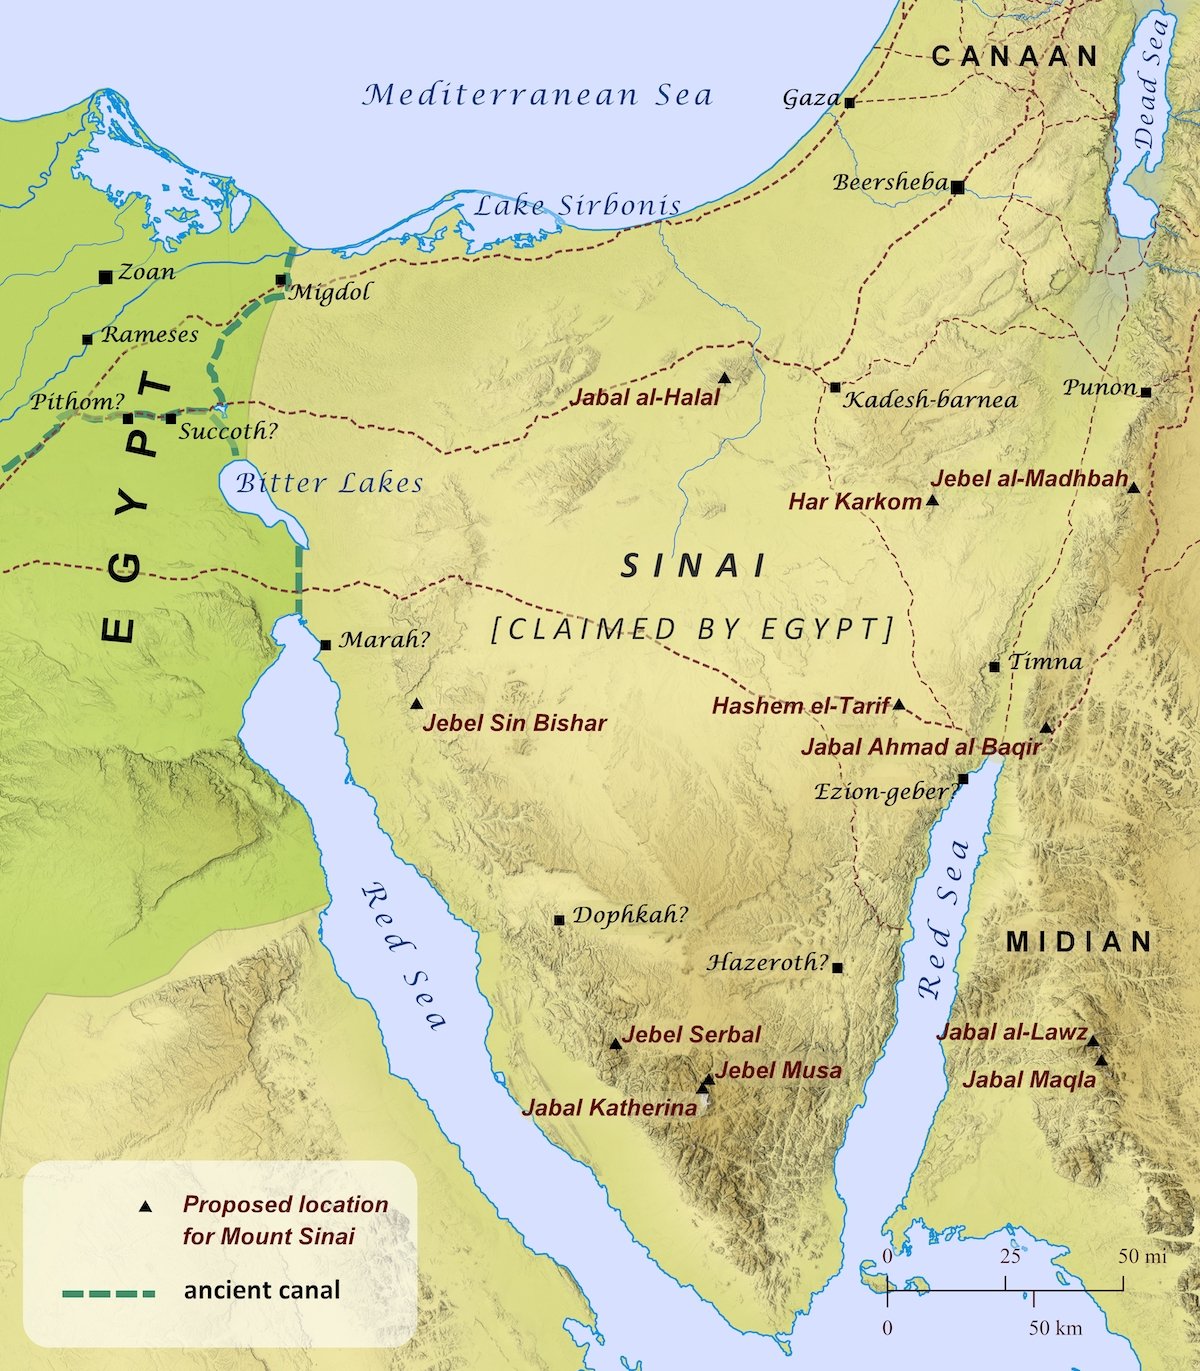 Map of Sinai with proposed locations for Mount Sinai. Image courtesy of biblemapper.com